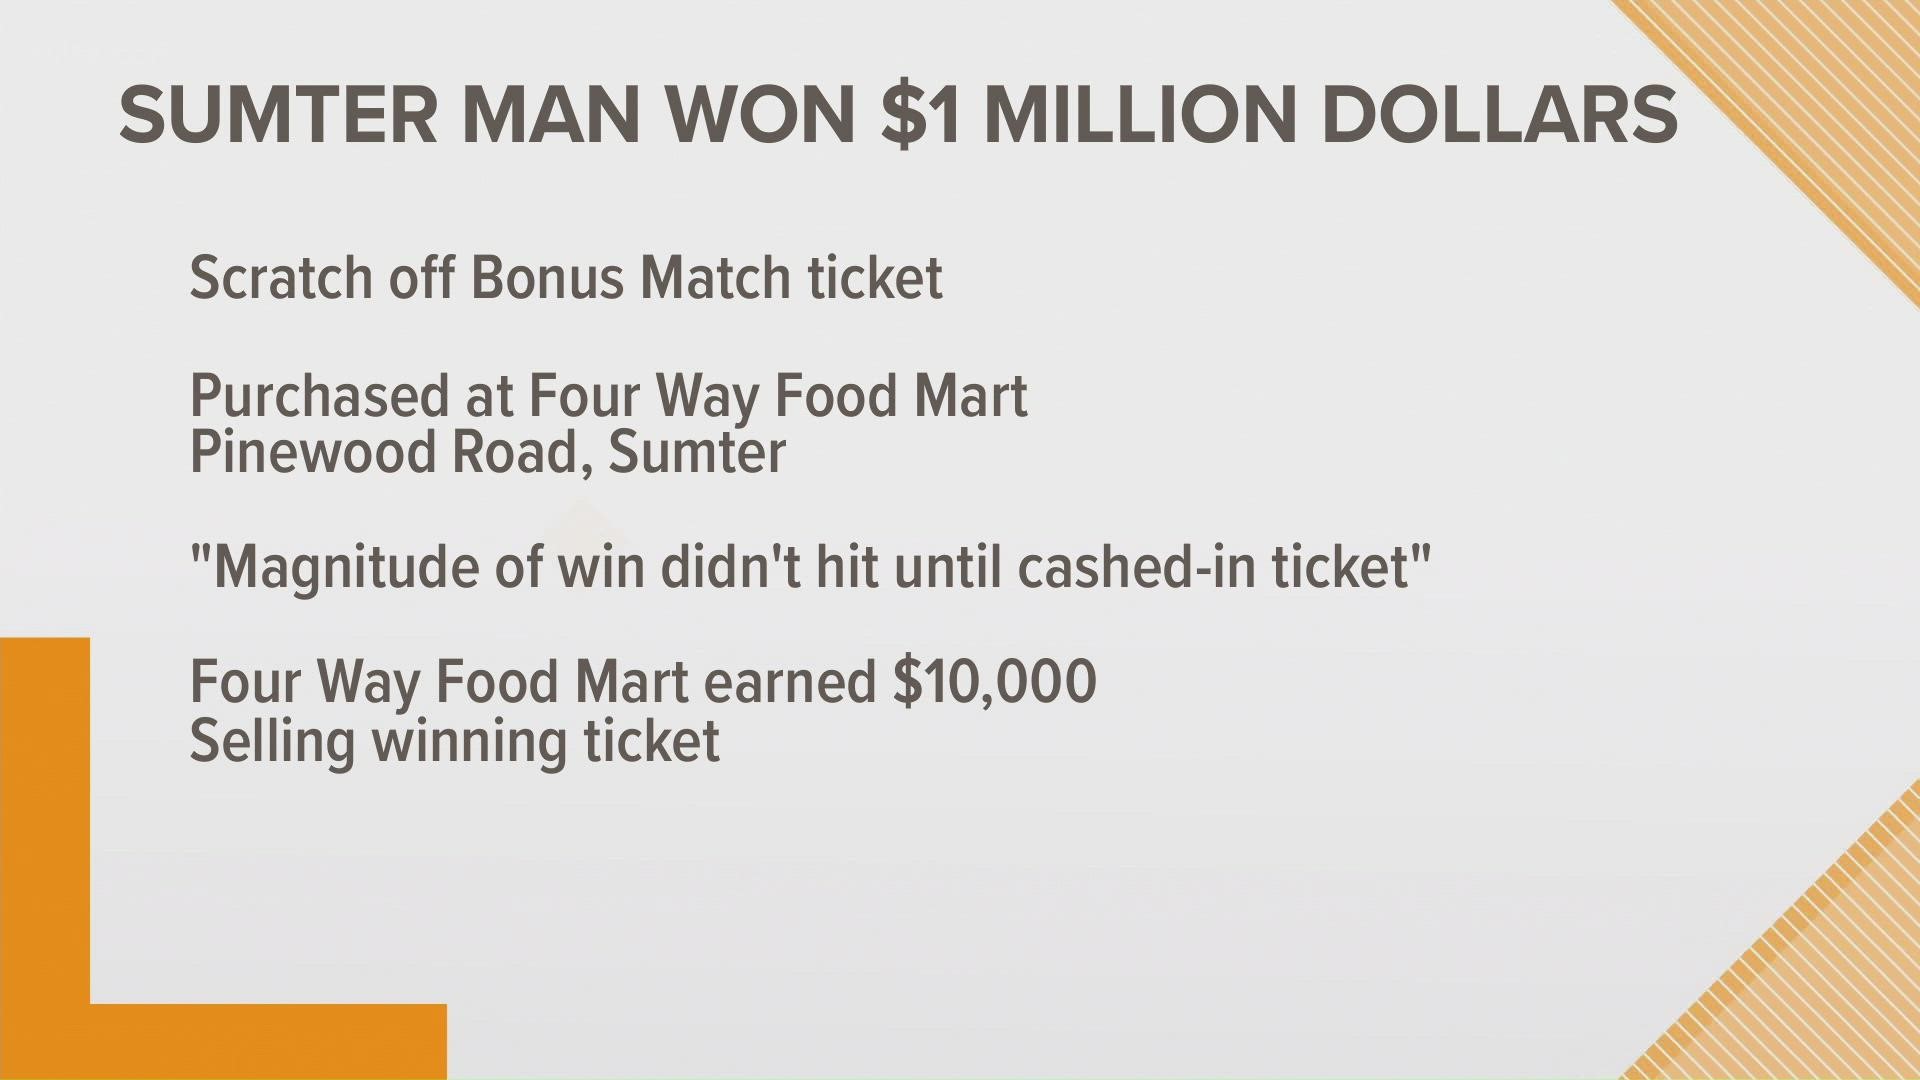 Sumter county man wins one million dollars with Bonus Match lottery scratch-off ticket.